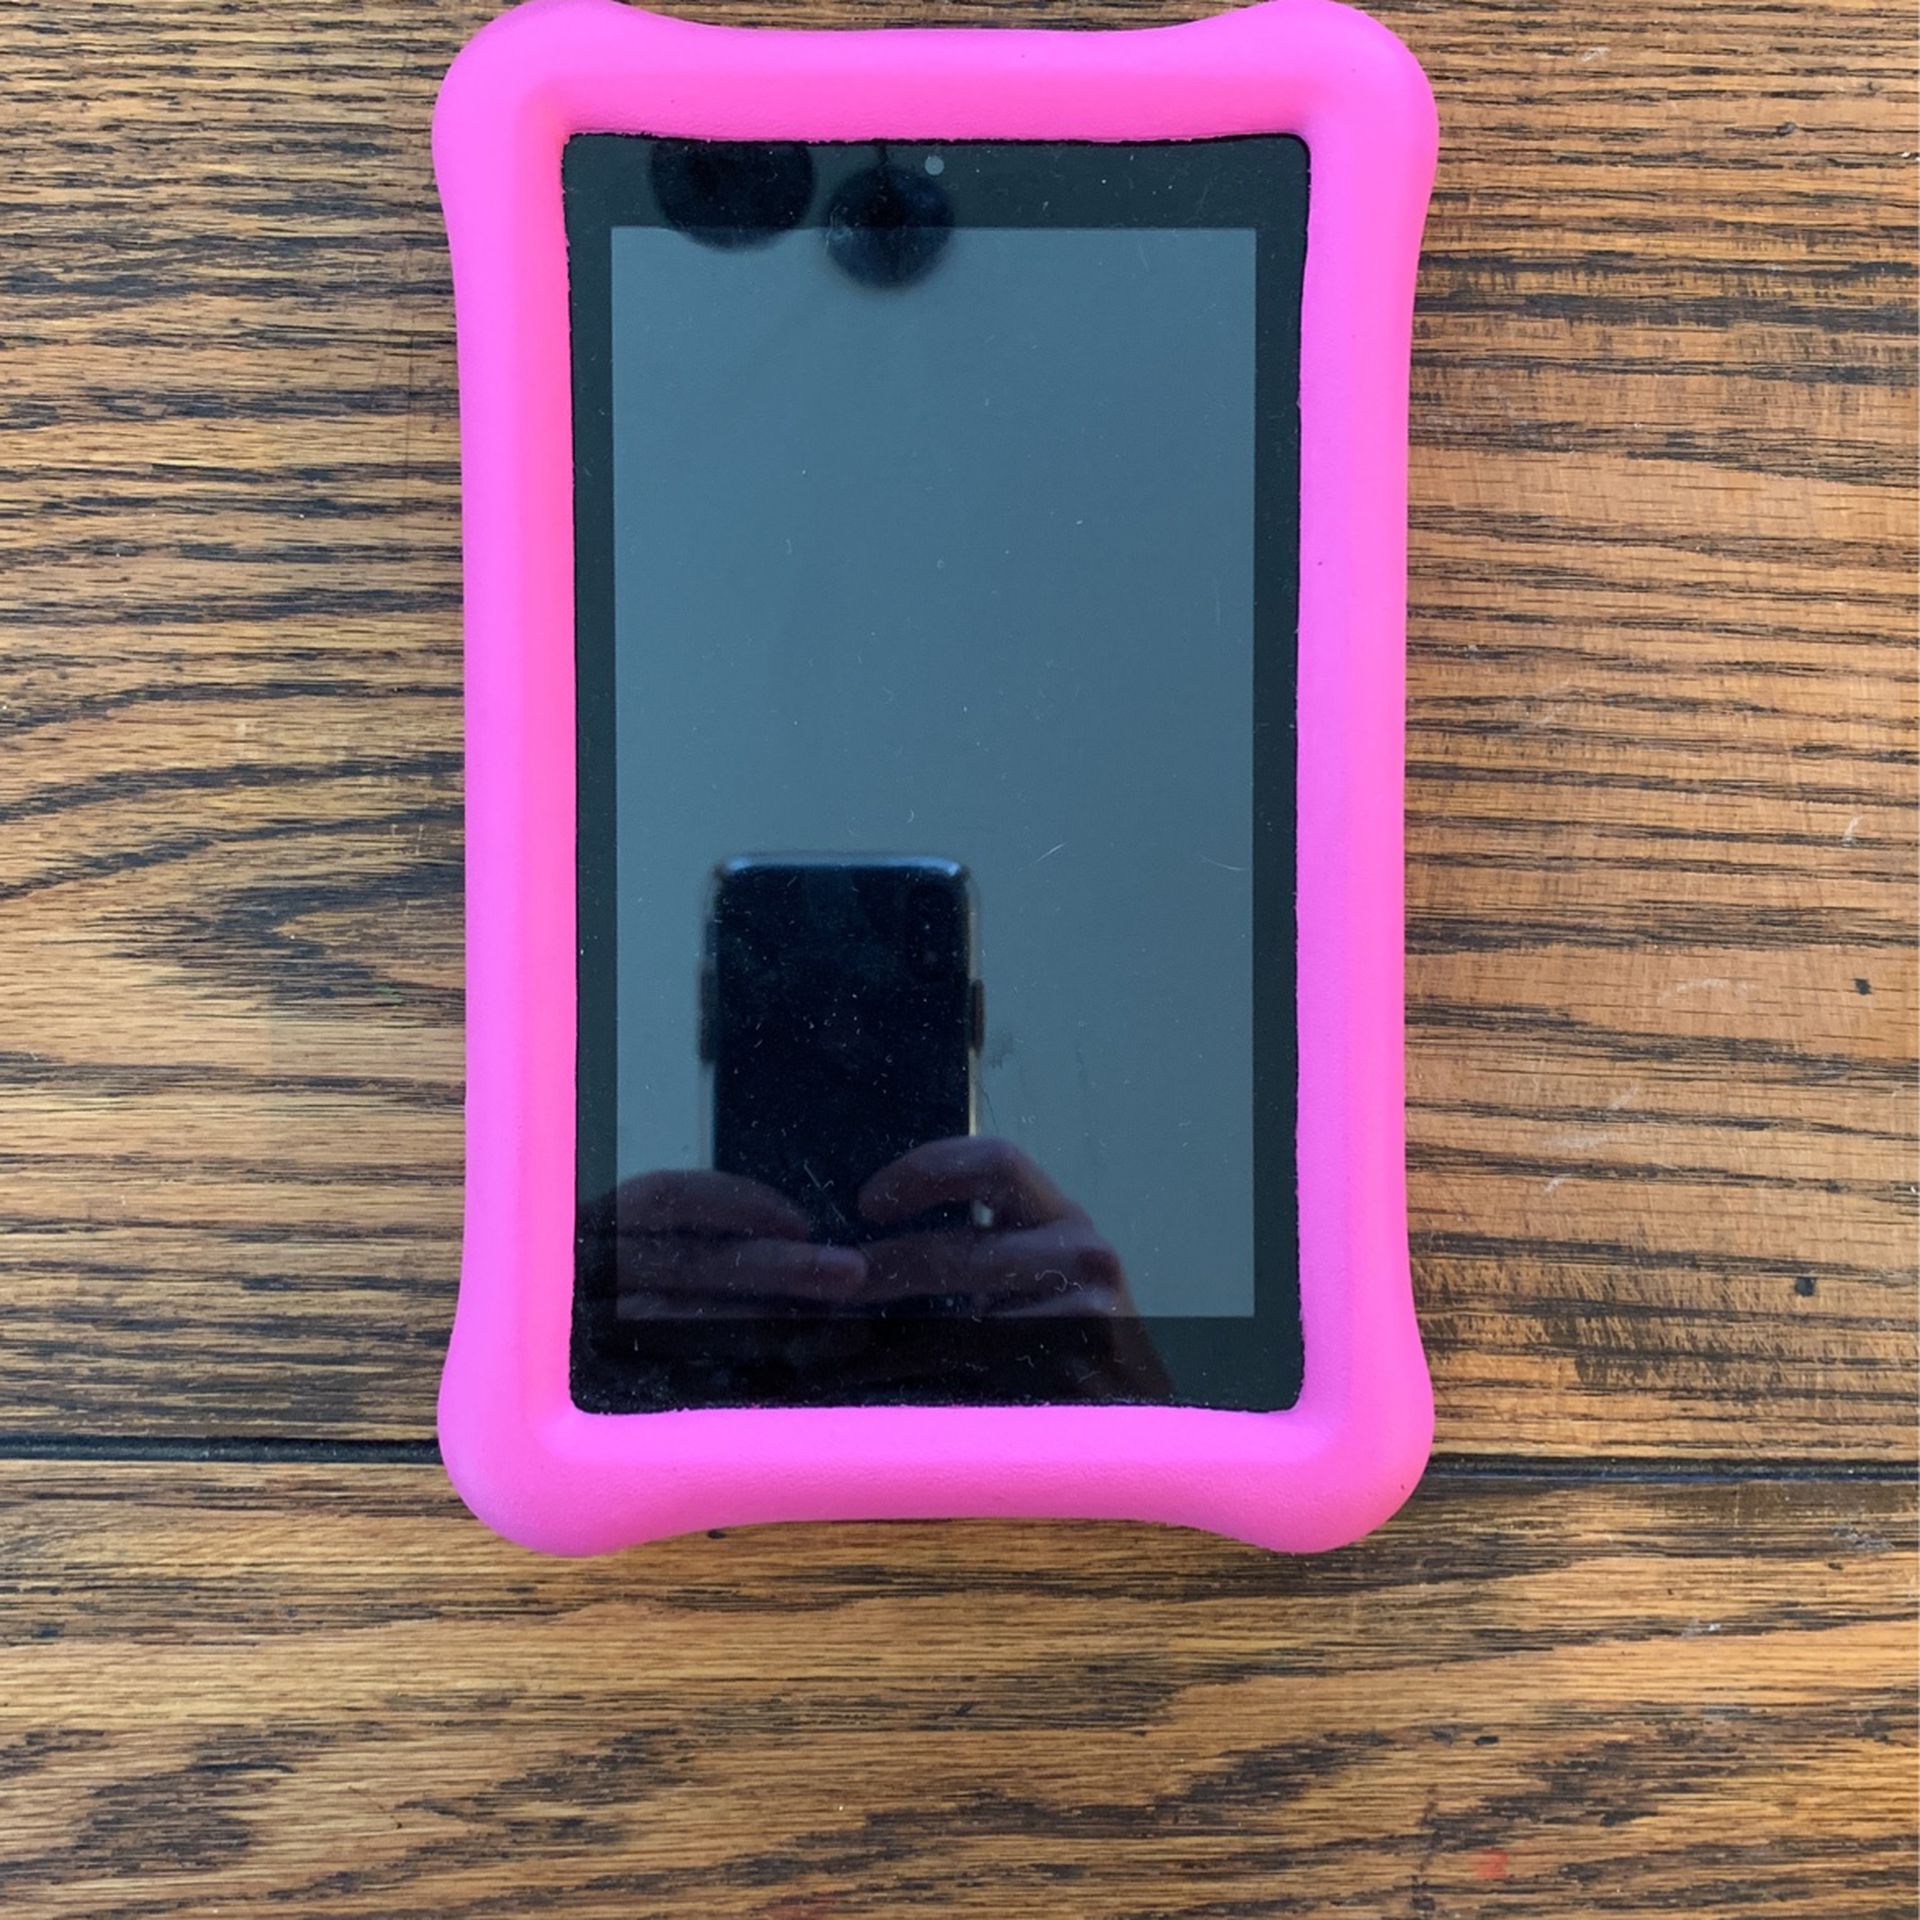 Kids Amazon Fire Tablet With Case